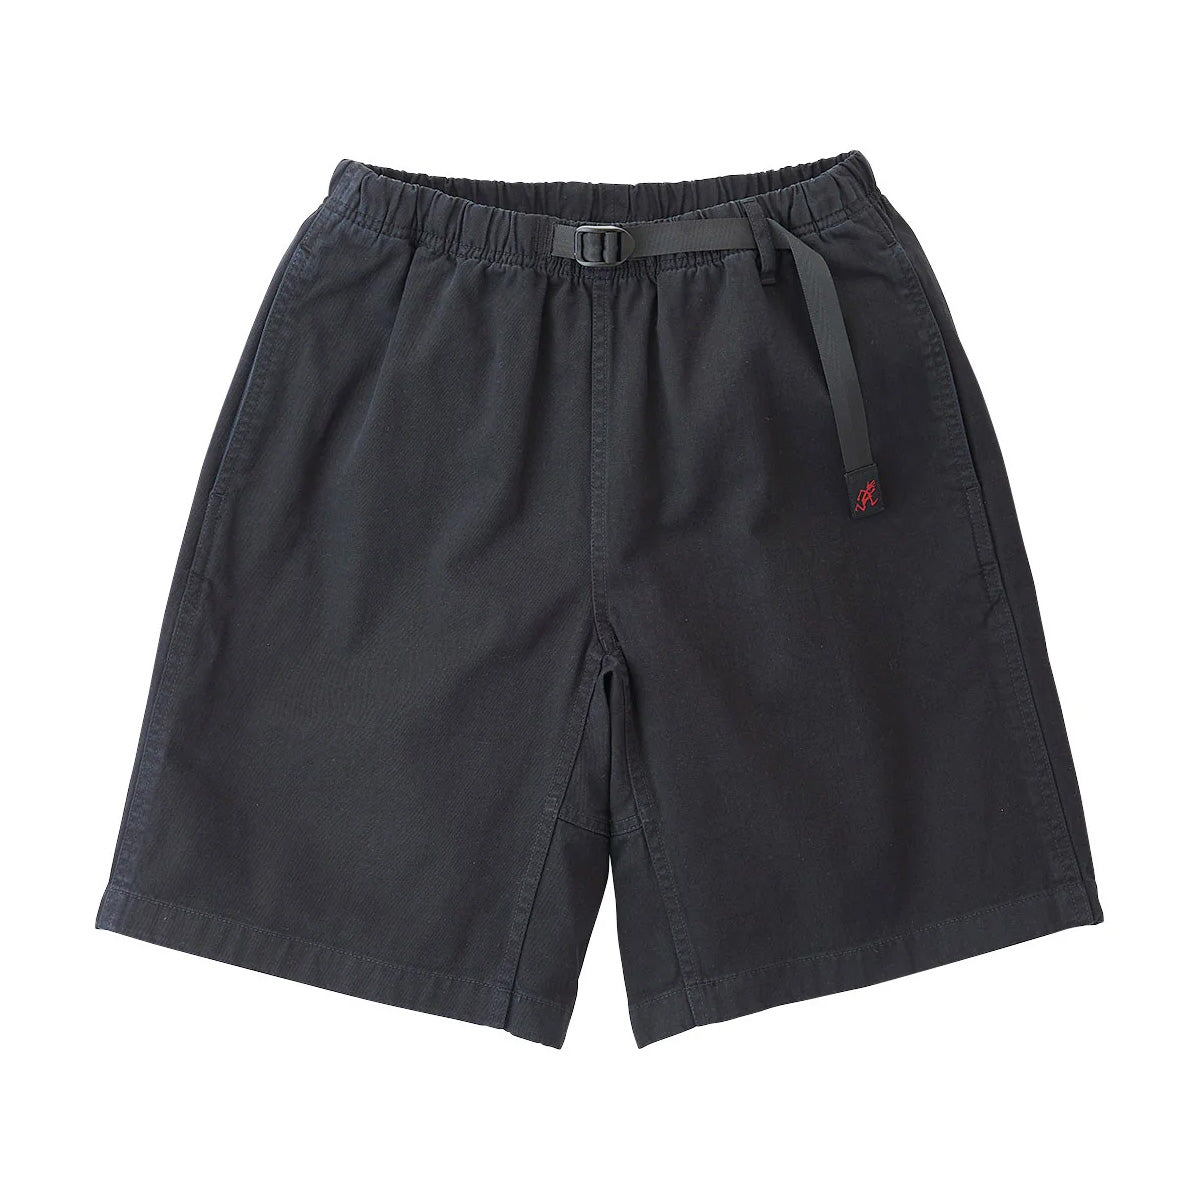 Black gramicci outdoor shorts with adjustable waist. Free uk shipping over £50